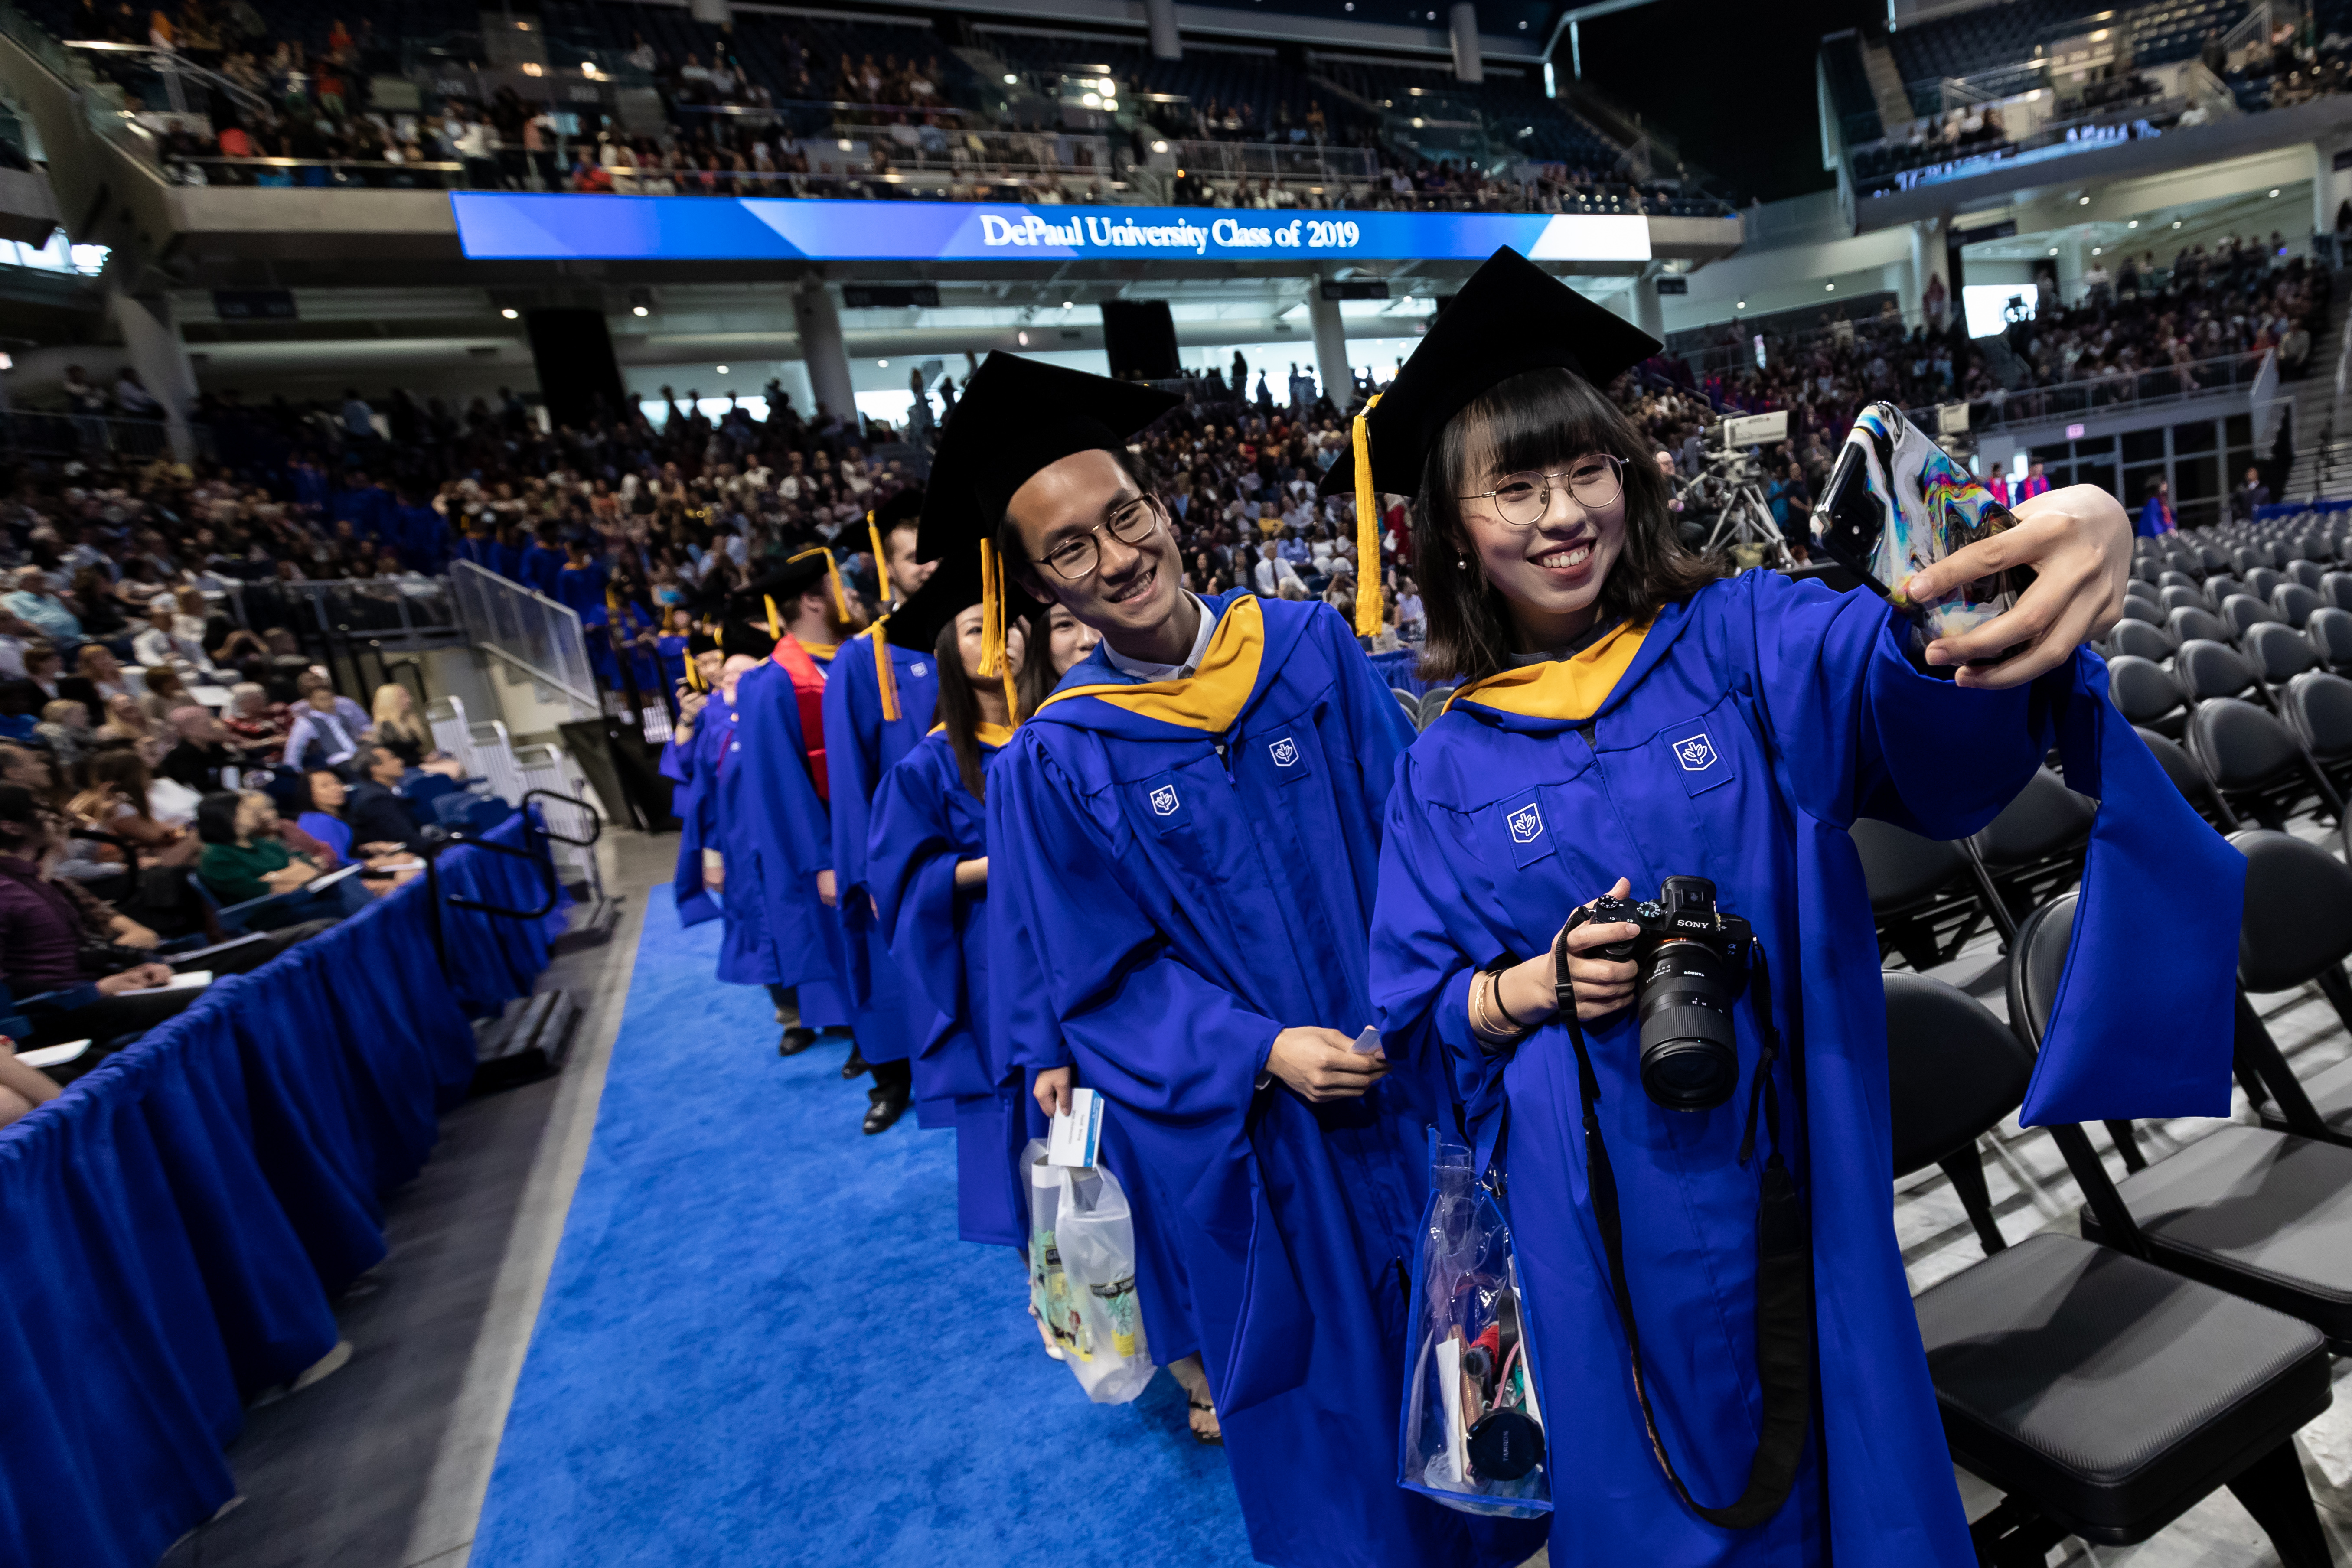 Students take a selfie before their graduation ceremony 